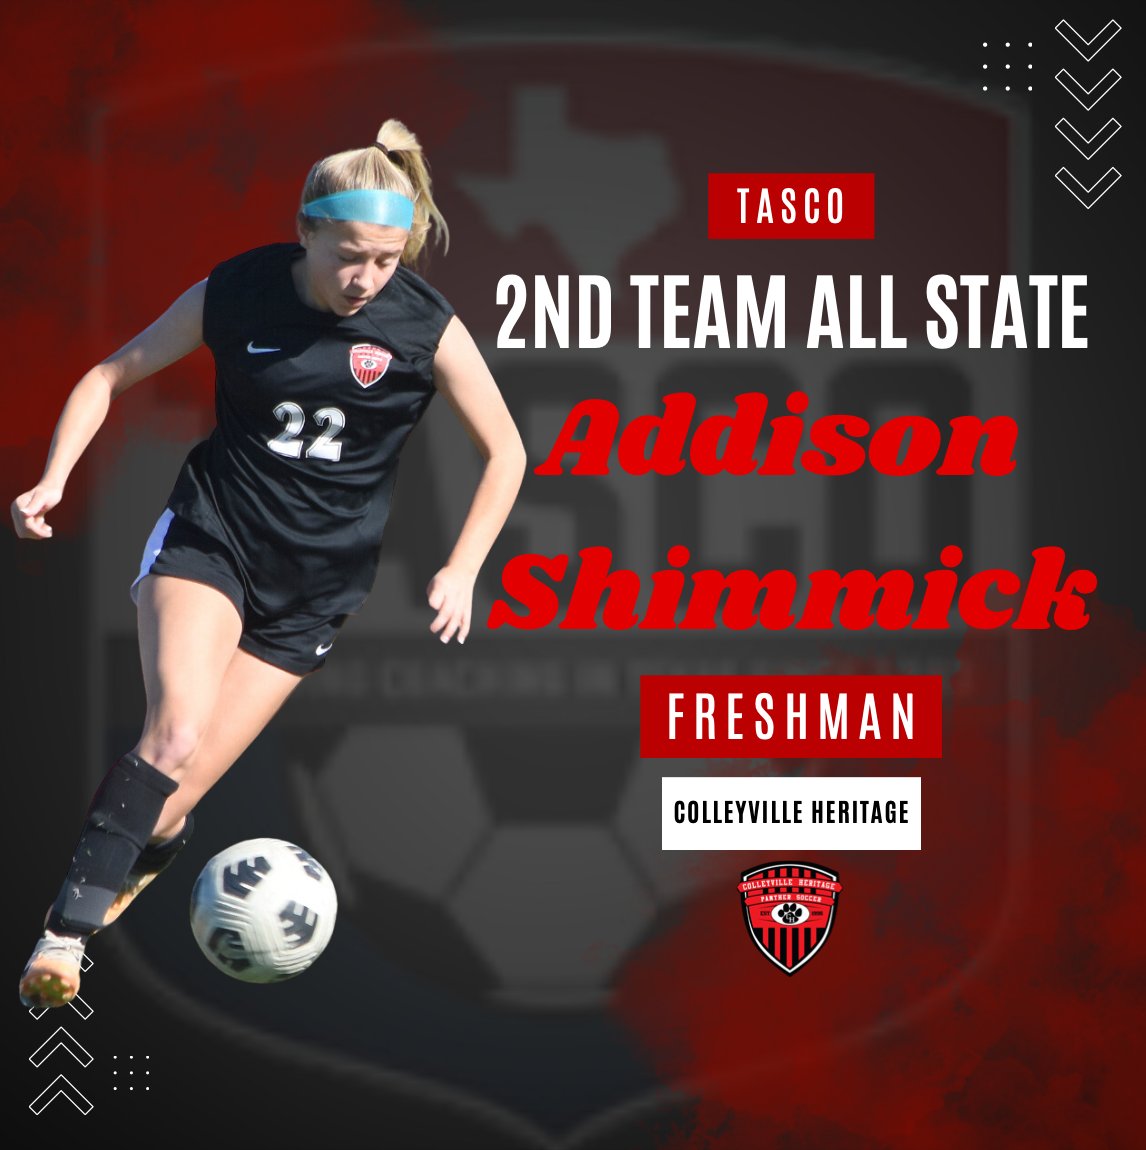 Big Congrats to Addison Shimmick on being named TASCO 2nd Team All State! #PFND